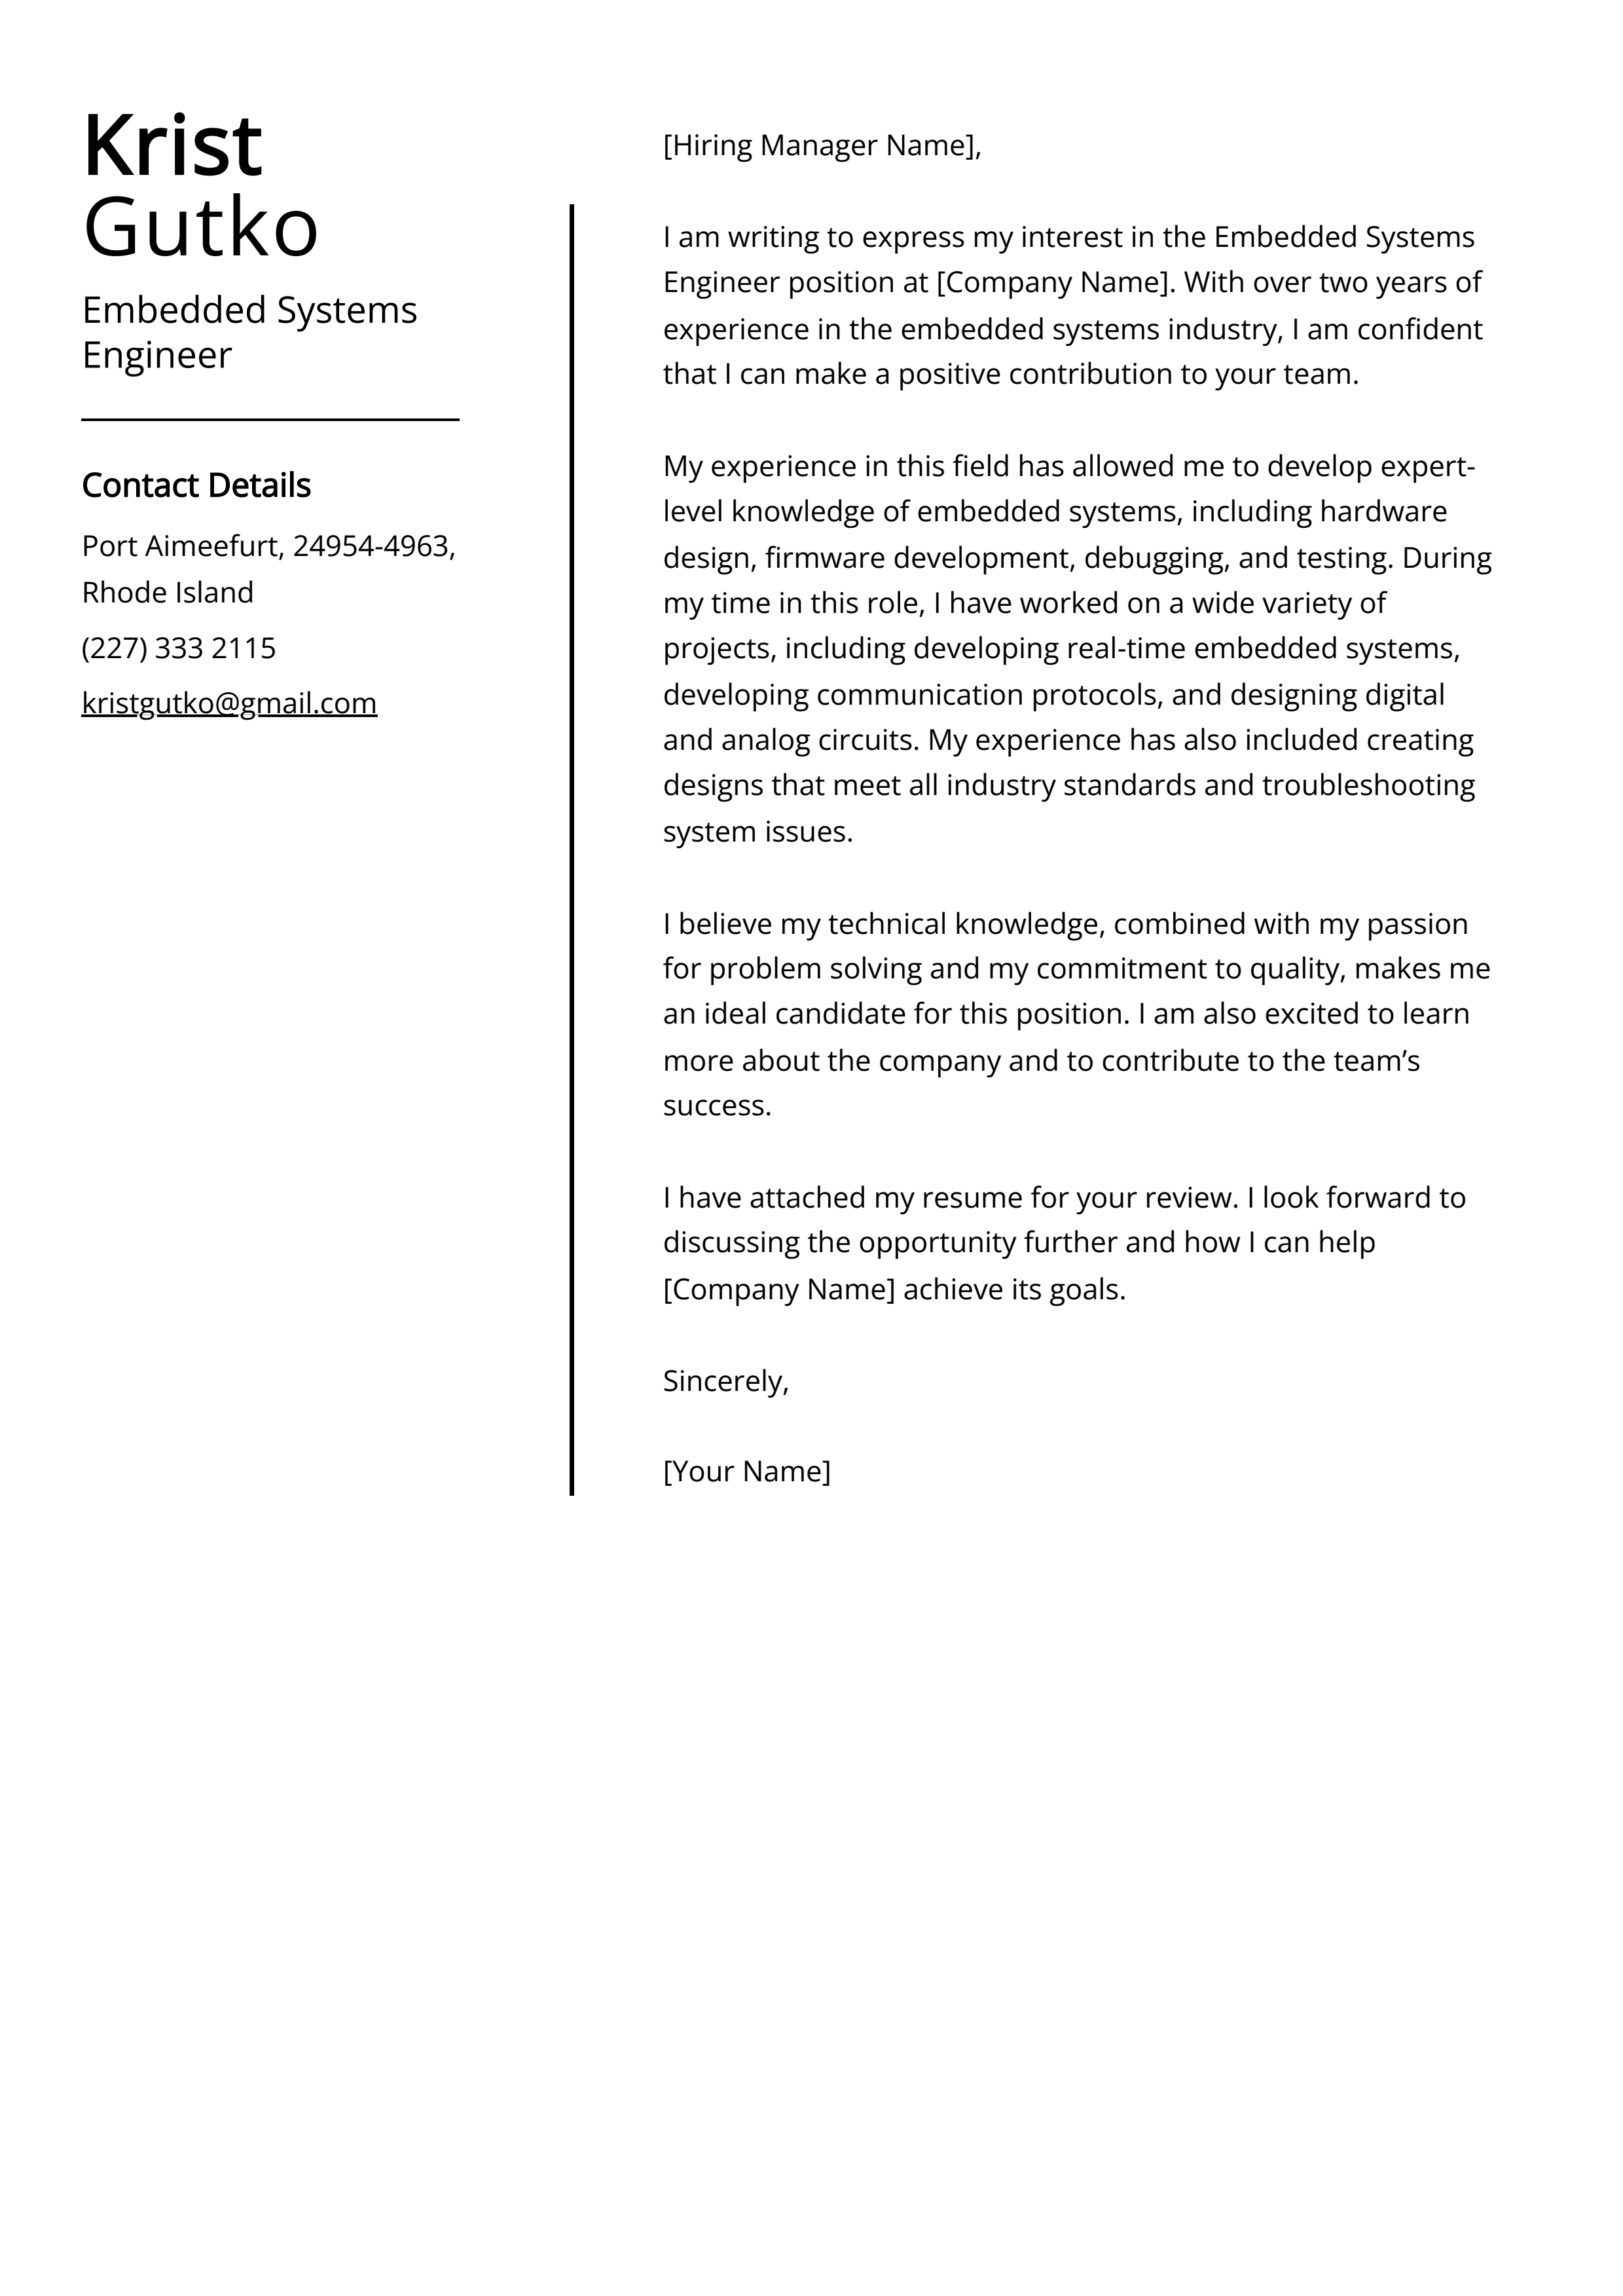 Embedded Systems Engineer Cover Letter Example